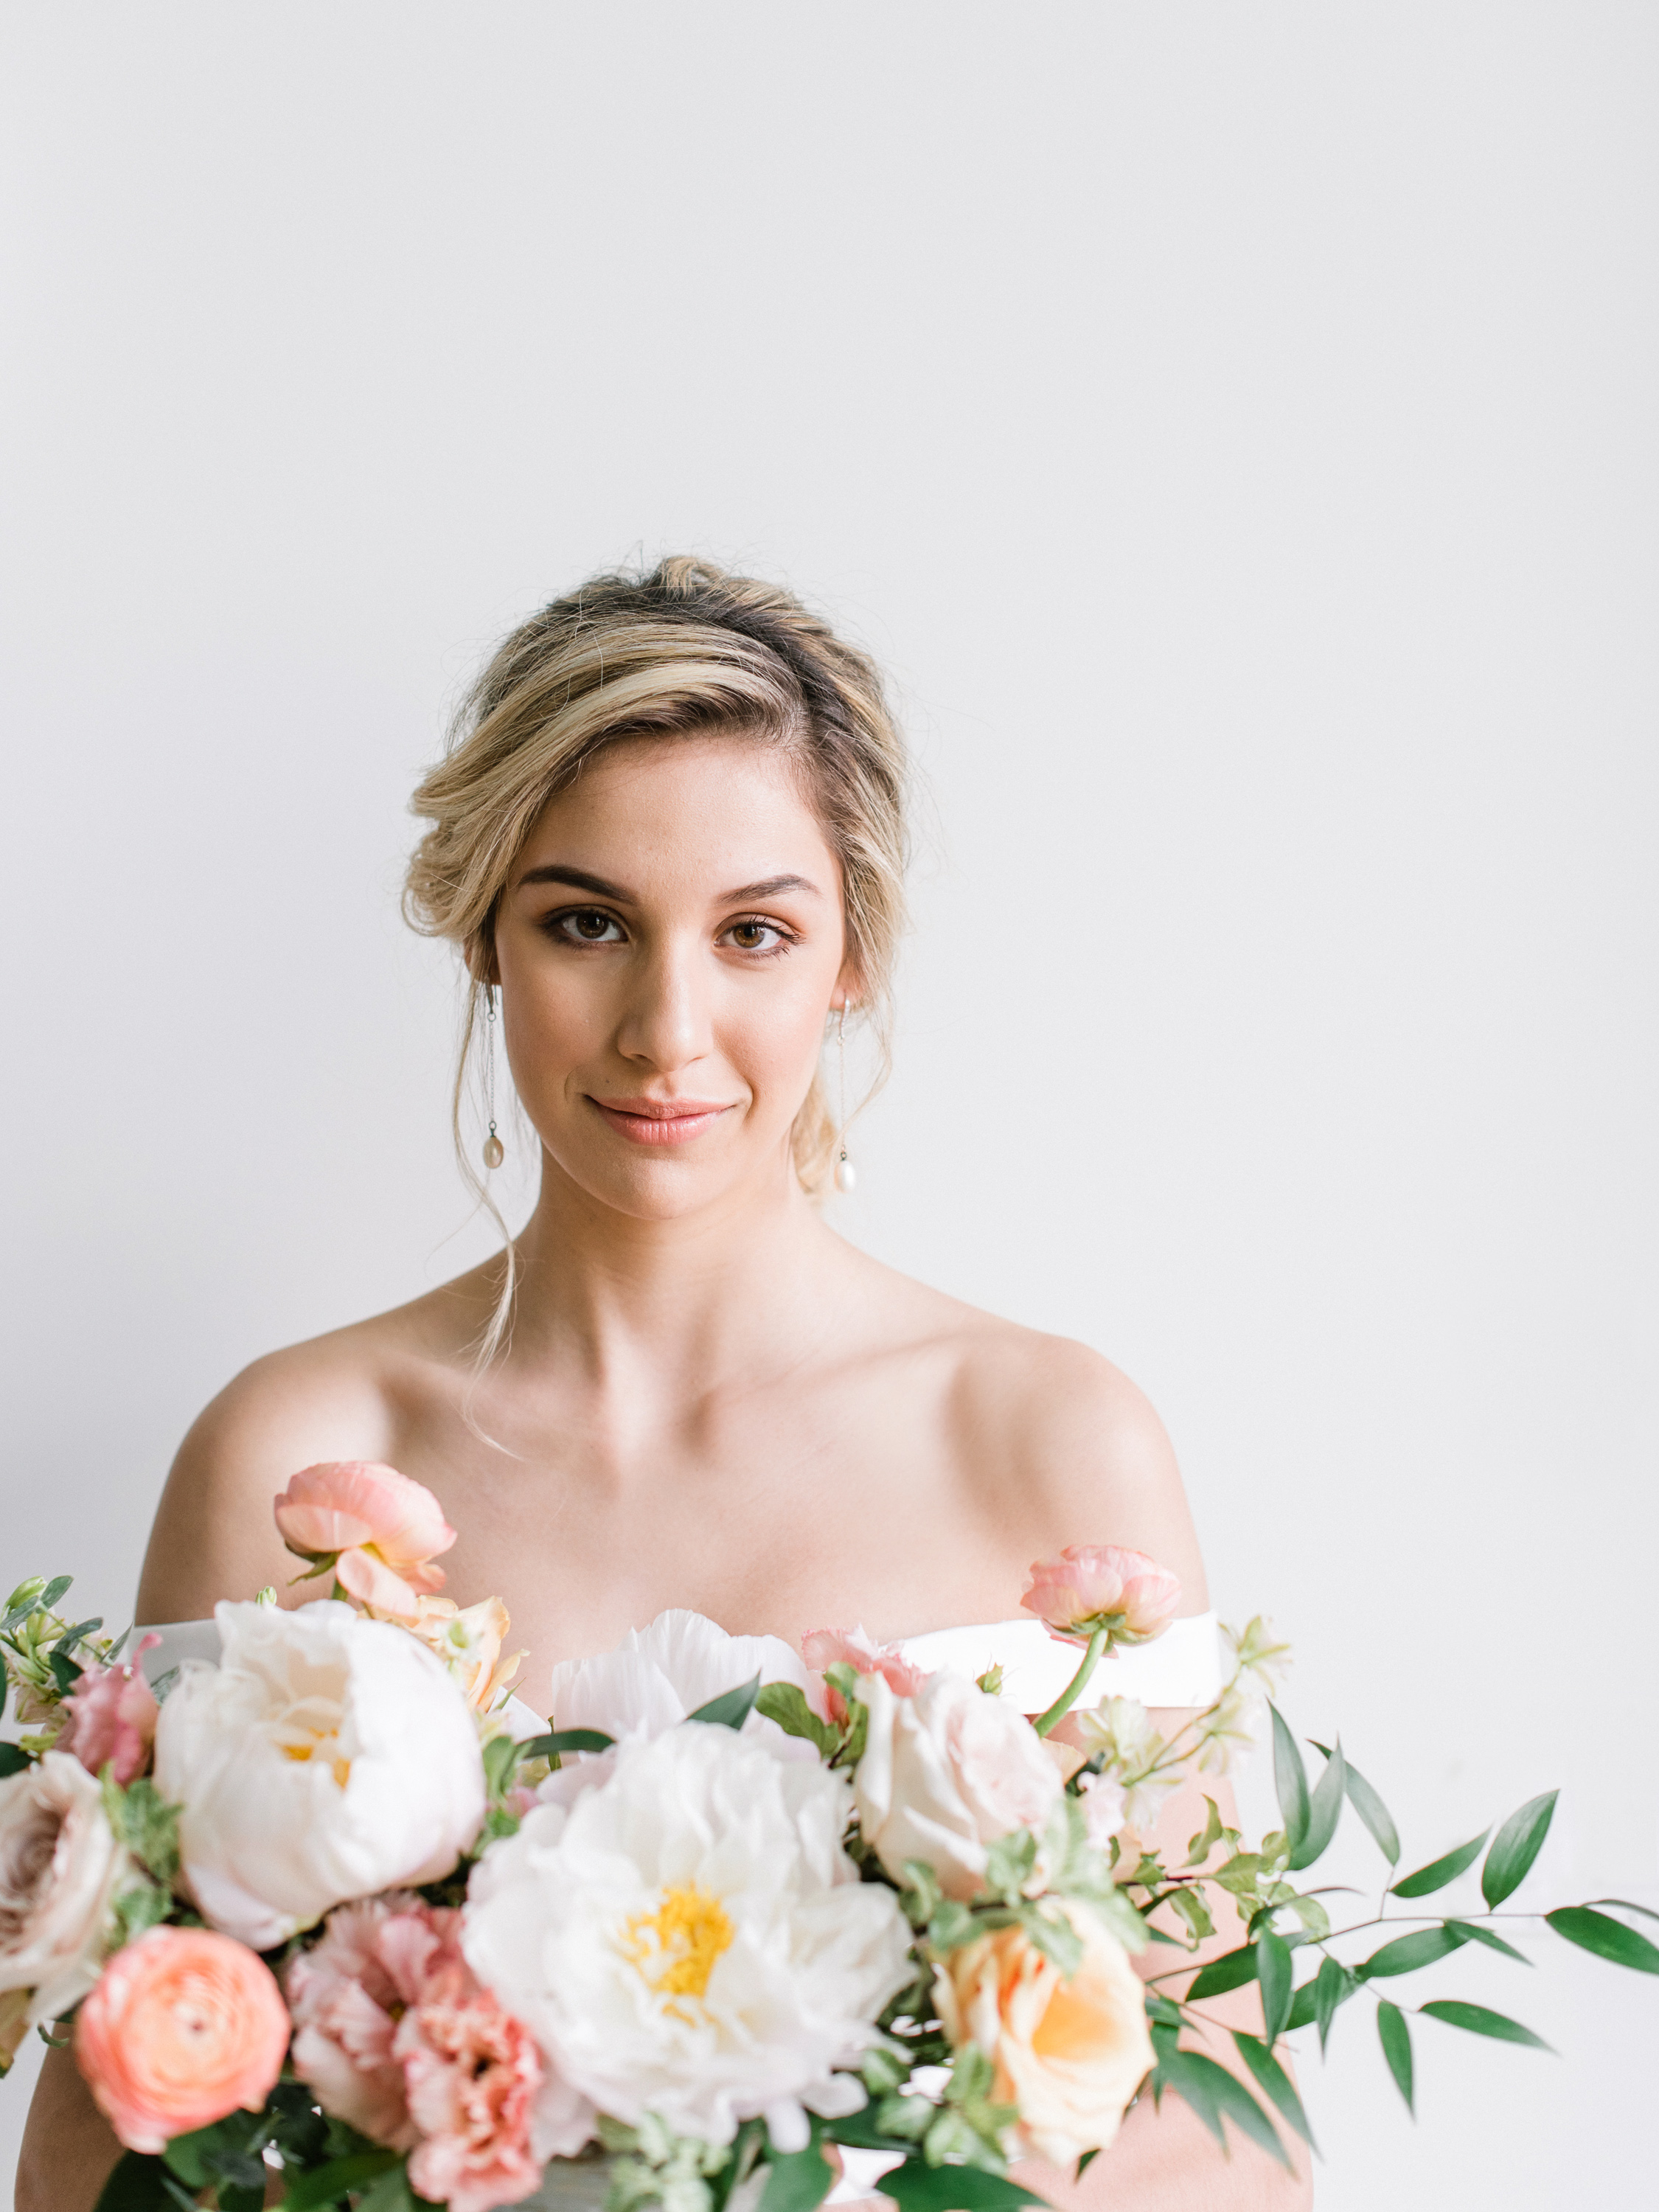 This Stunning Shoot Combines Fine Art Inspiration and Colourful Florals in the Most Beautiful Way - on the Bronte Bride Blog